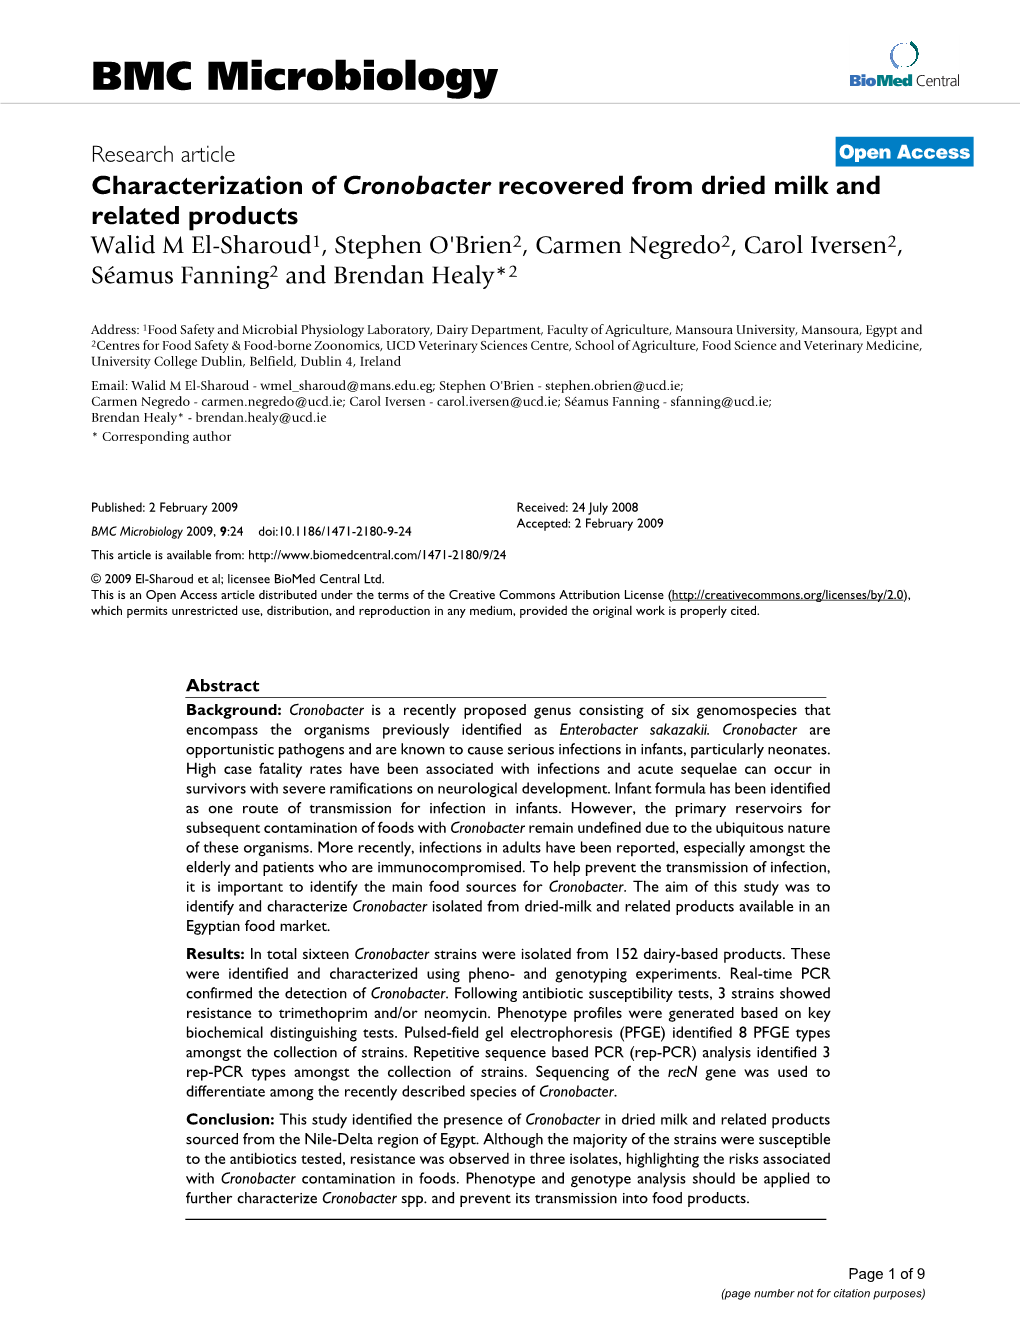 Characterization of Cronobacter Recovered from Dried Milk And